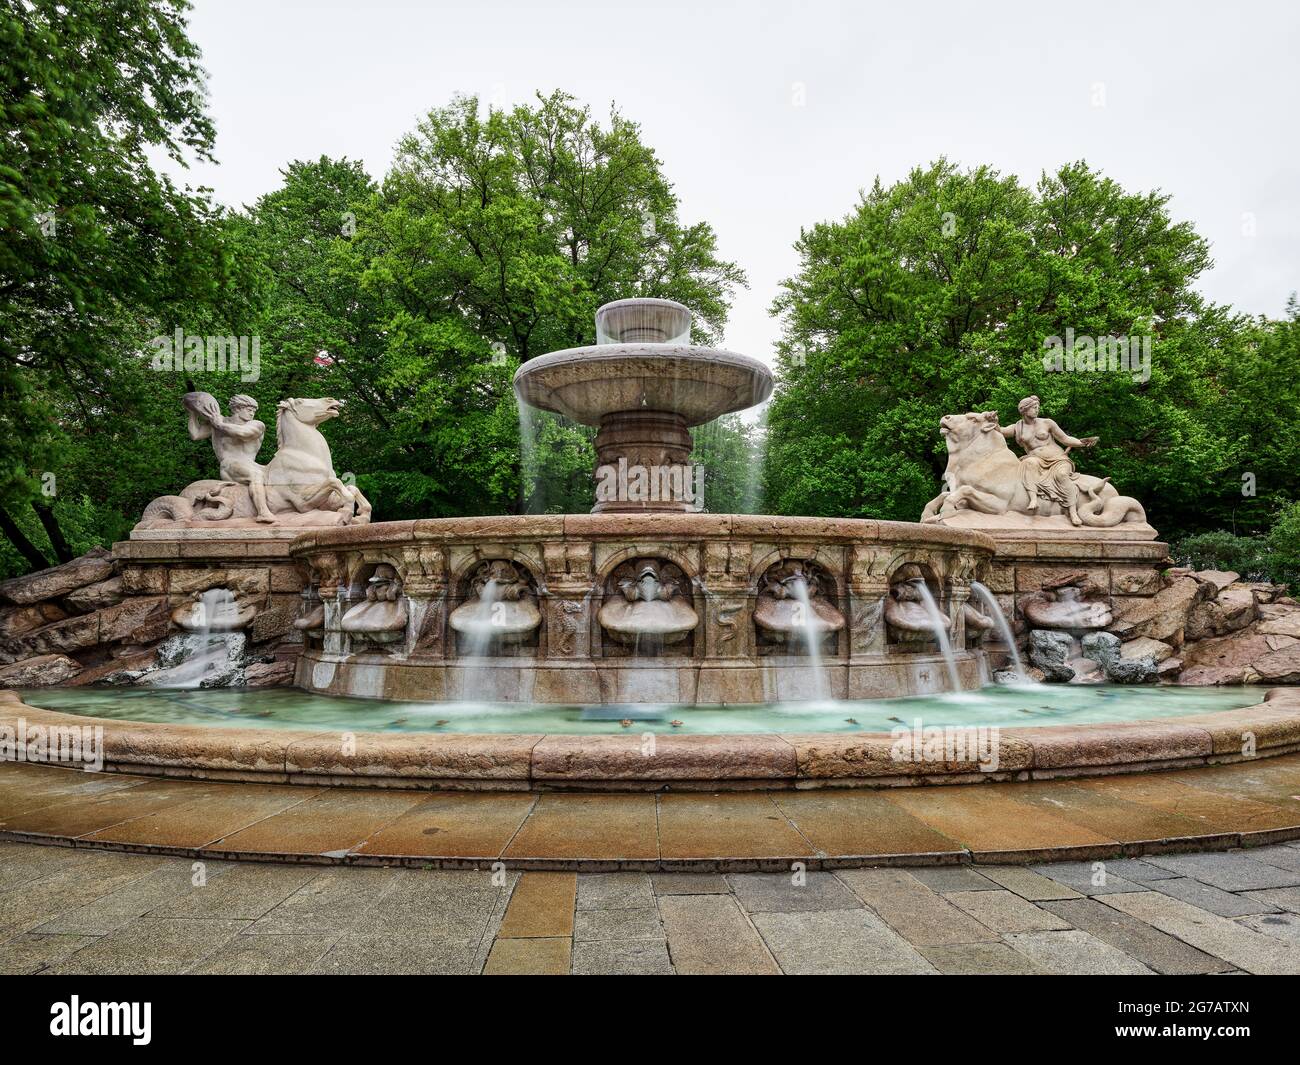 Dultplatz, state capital, university town, residence town, place of interest, historical sight, monument, listed, monument protection, Wittelsbacher, fountain, square, monumental fountain, monumental building, classical antiquity, fountain construction, renaissance, Adolf von Hildebrand, Erwin Kurz (sculptor), classicism Stock Photo